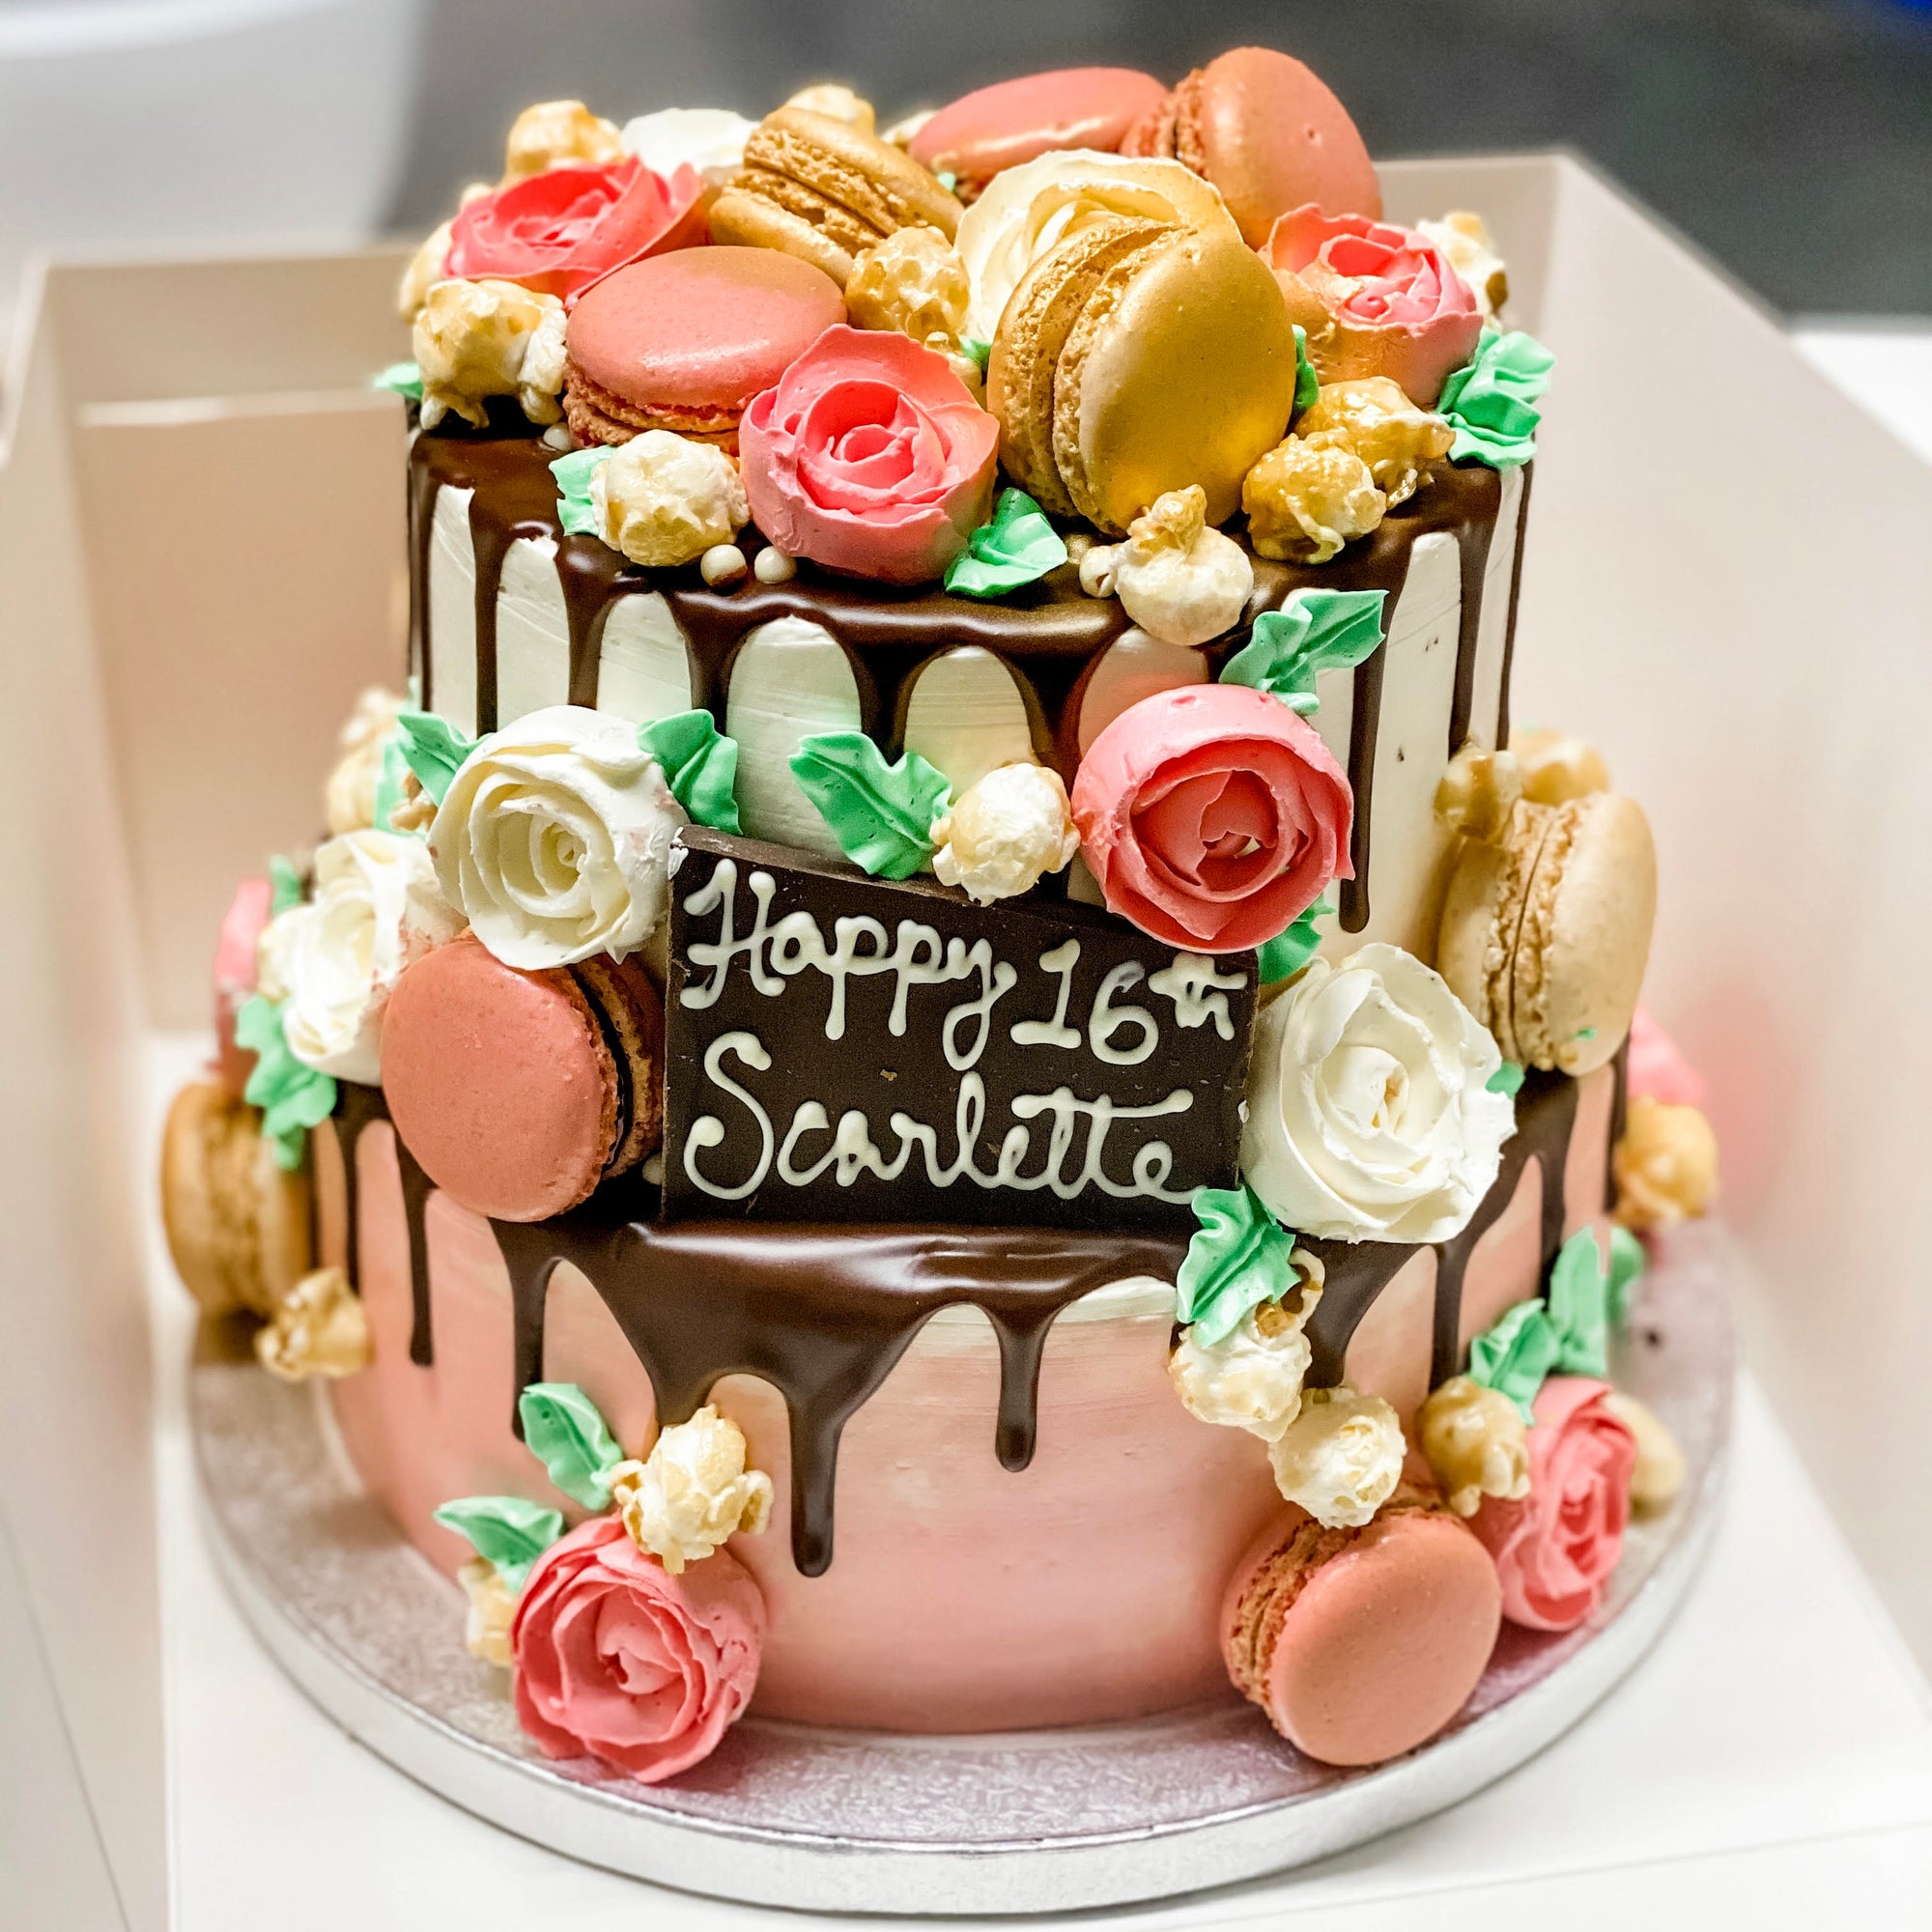 Top 10 Best Cakes For Birthday and Parties You Must Try Once | Blog -  MyFlowerTree